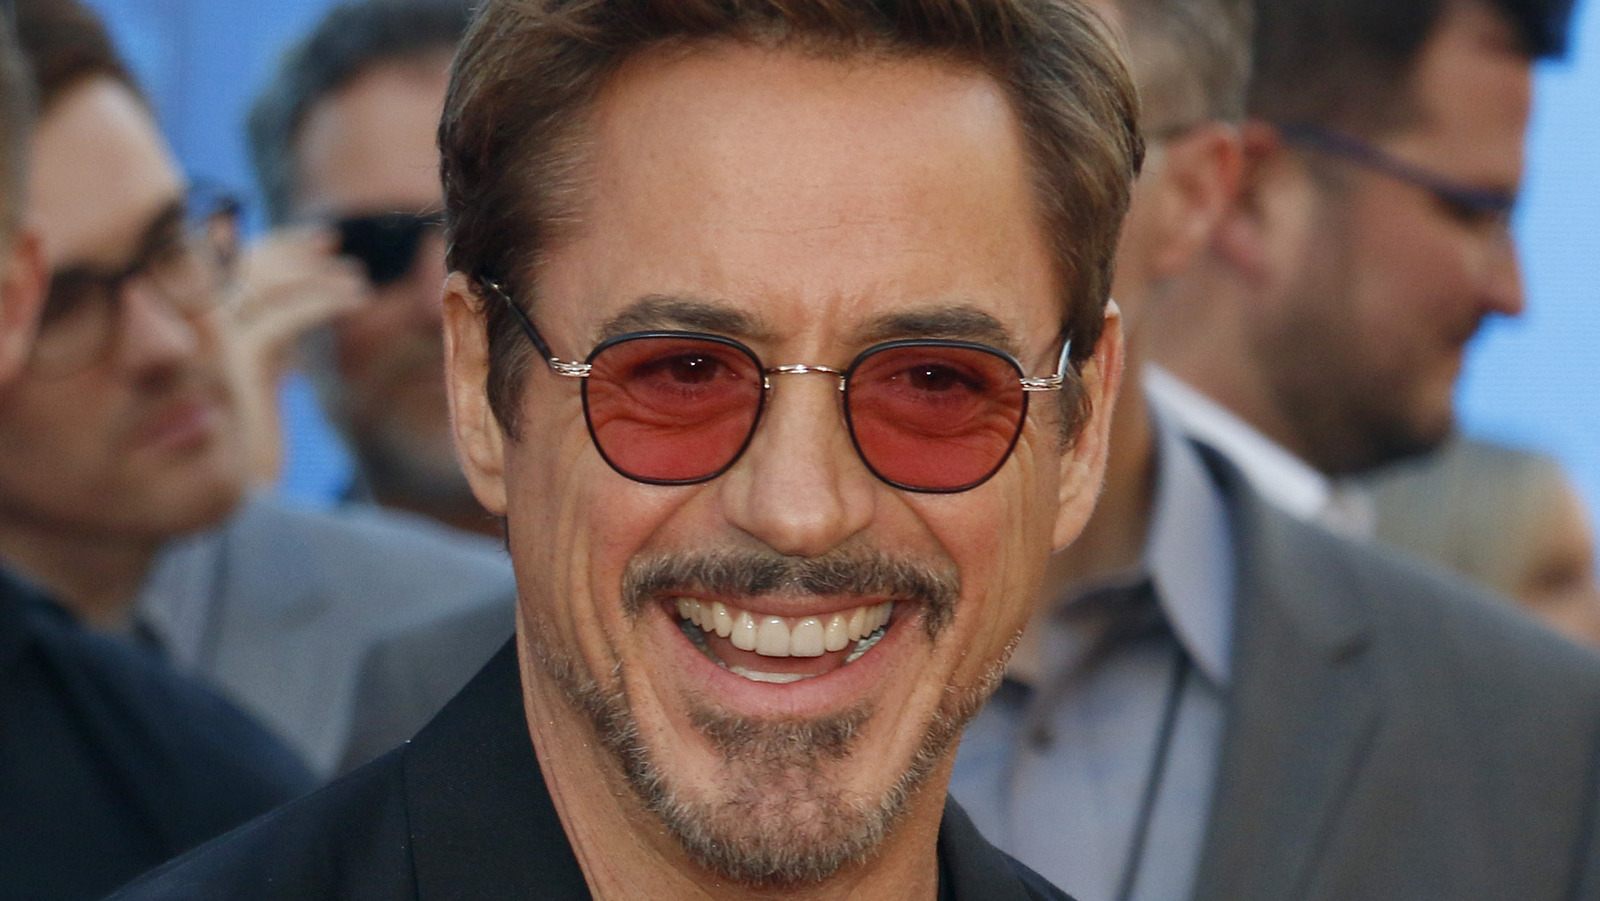 Robert Downey Jr Returns as Iron Man in Avengers: Secret Wars To Fight Kang  and Save the Universe Once Again? New MCU Rumor Sets Internet Ablaze